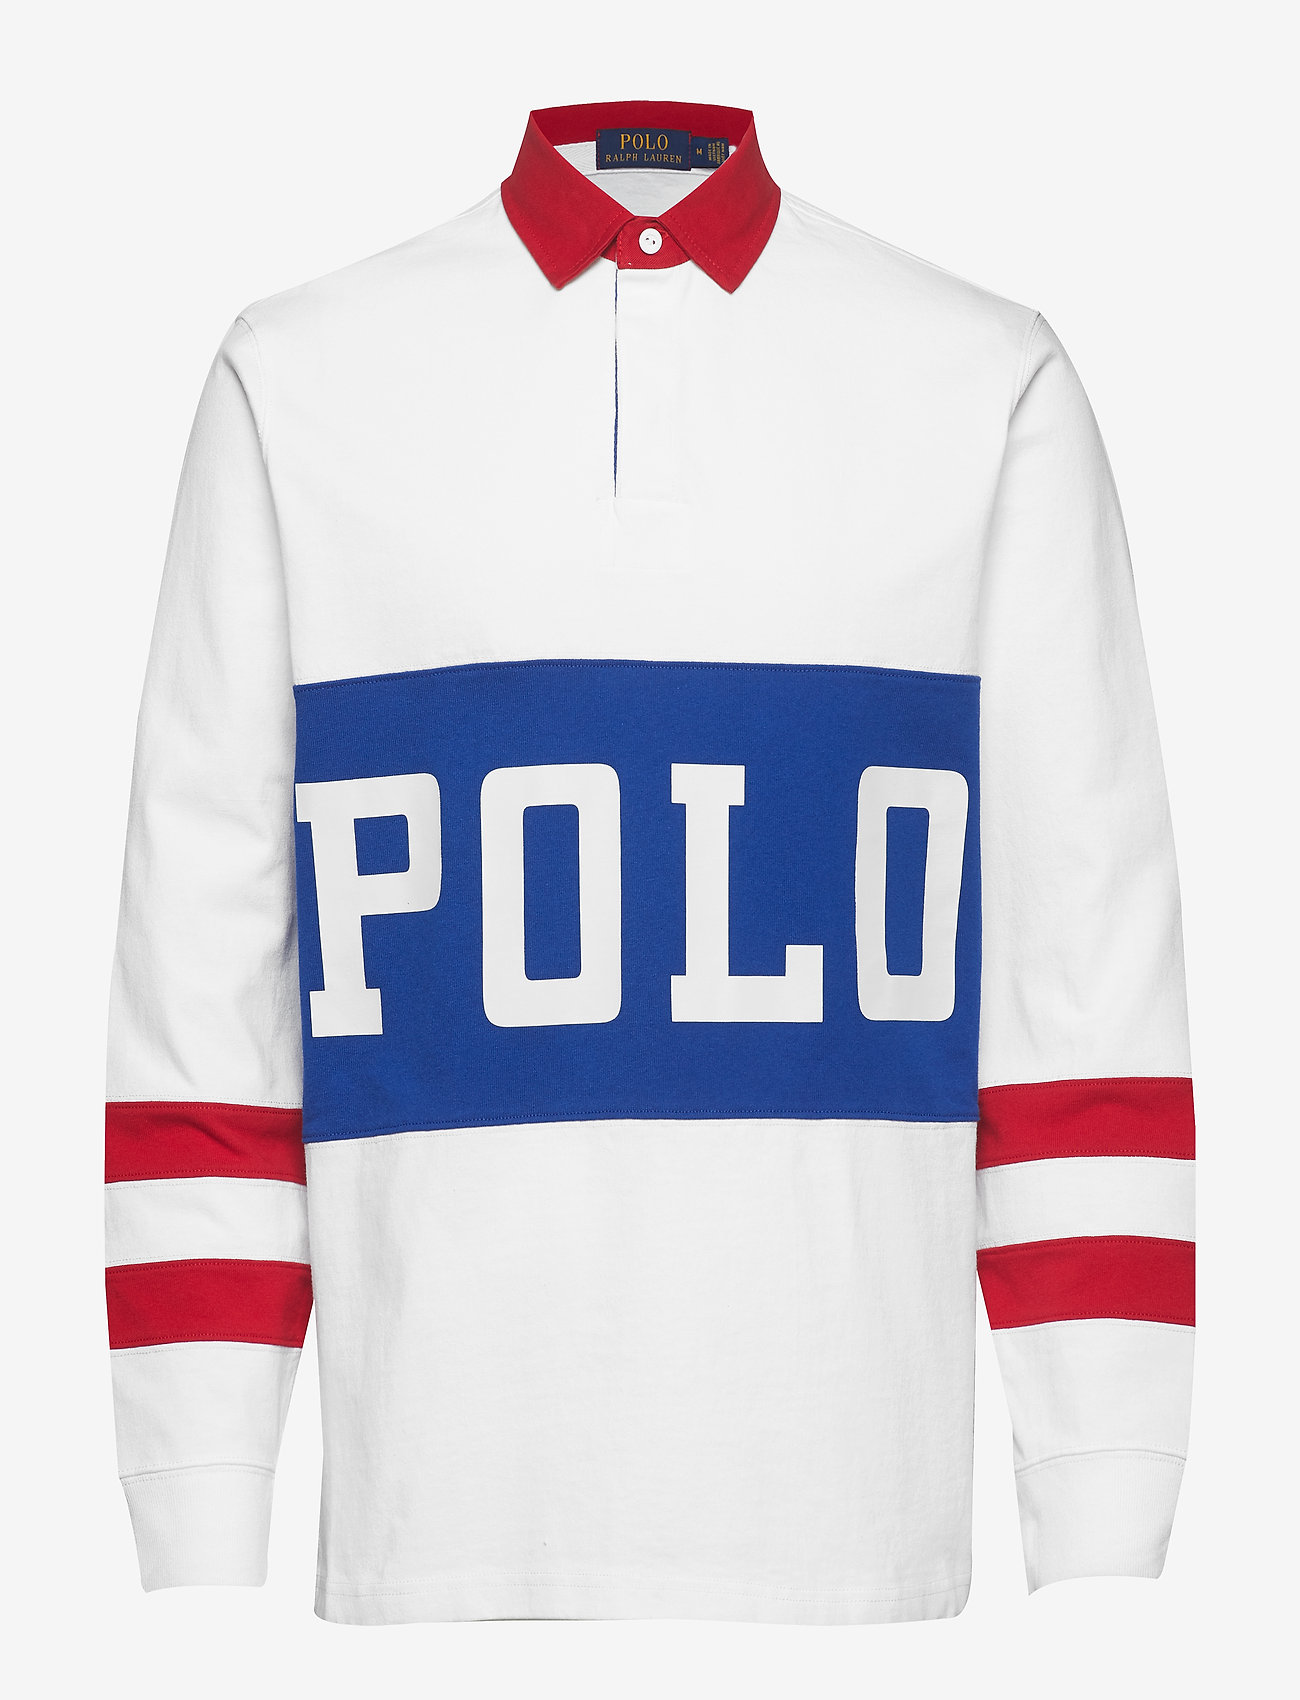 white adidas shirt with red stripes